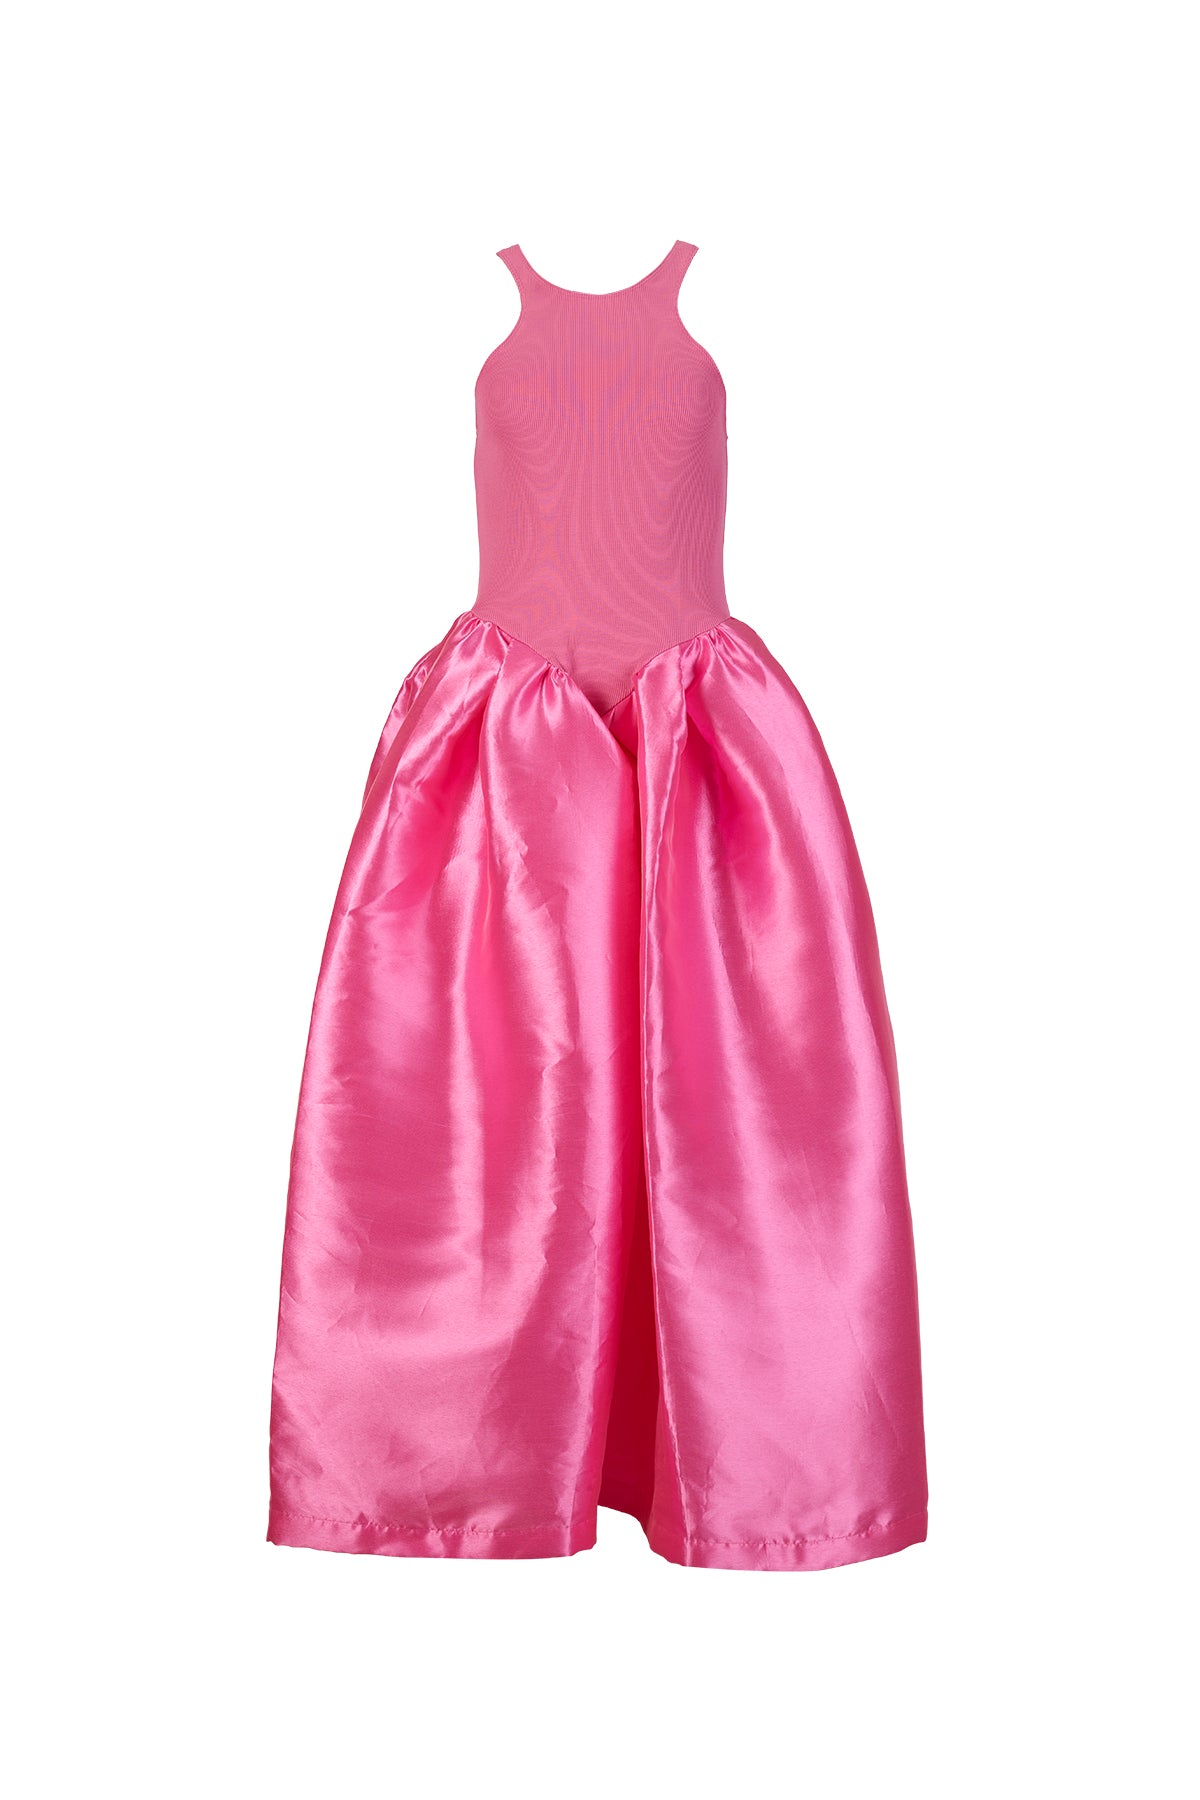 PINK DRESS WITH TANK TOP SCOOPED marques almeida